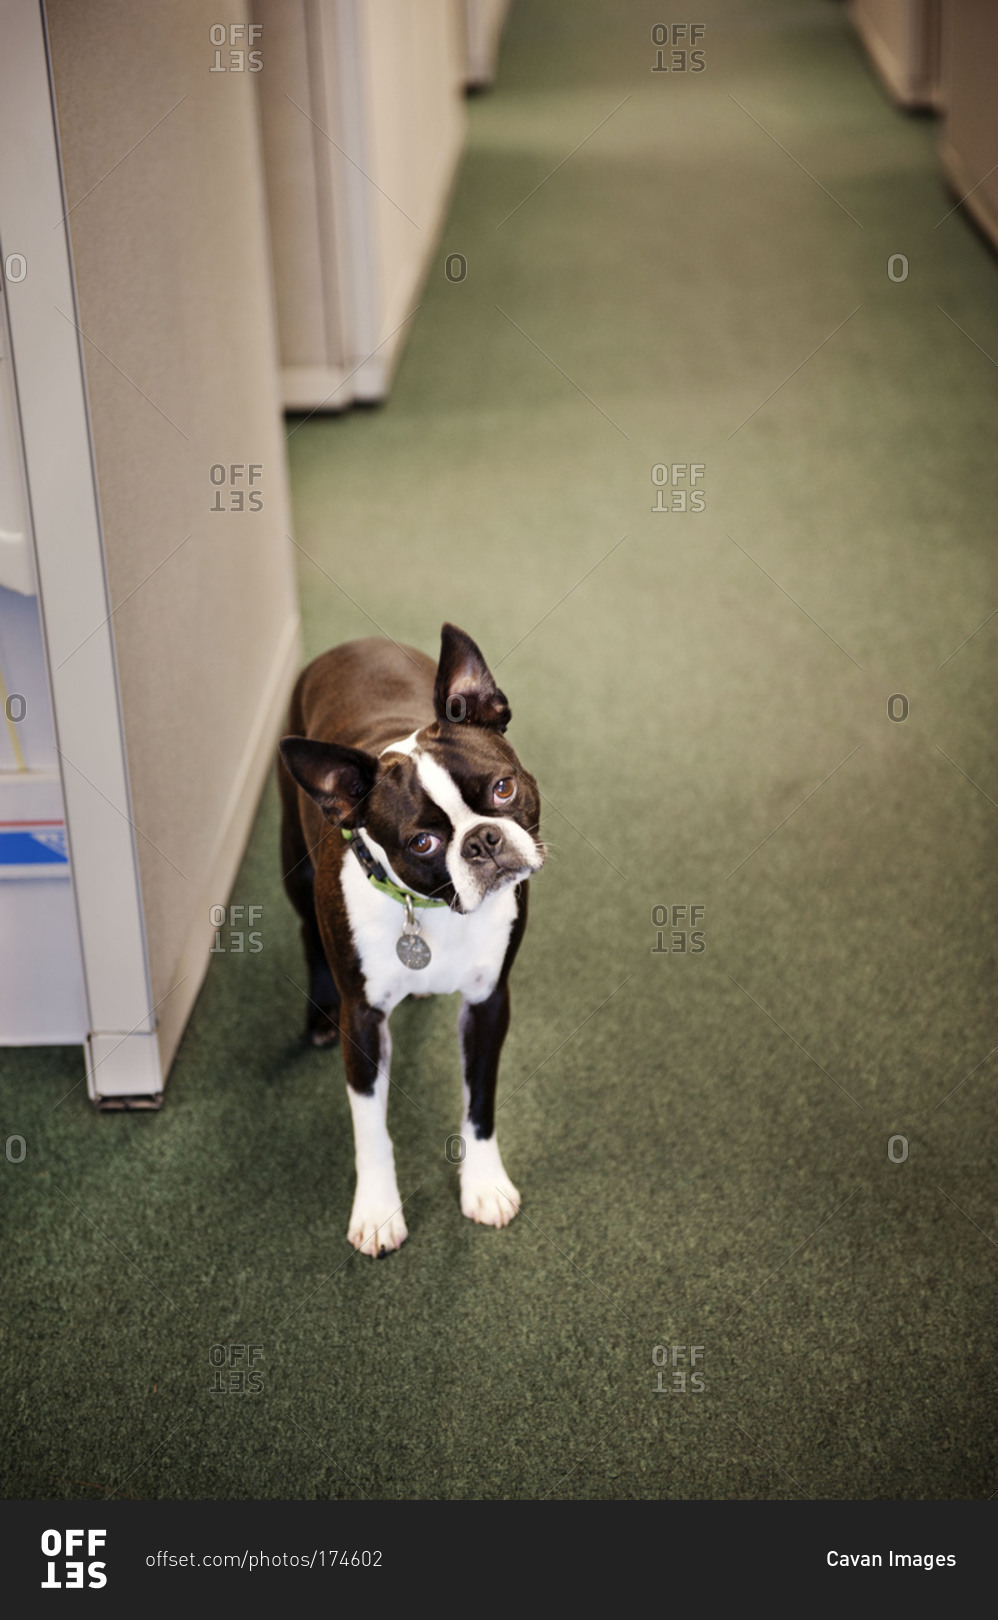 Cute dog in office building